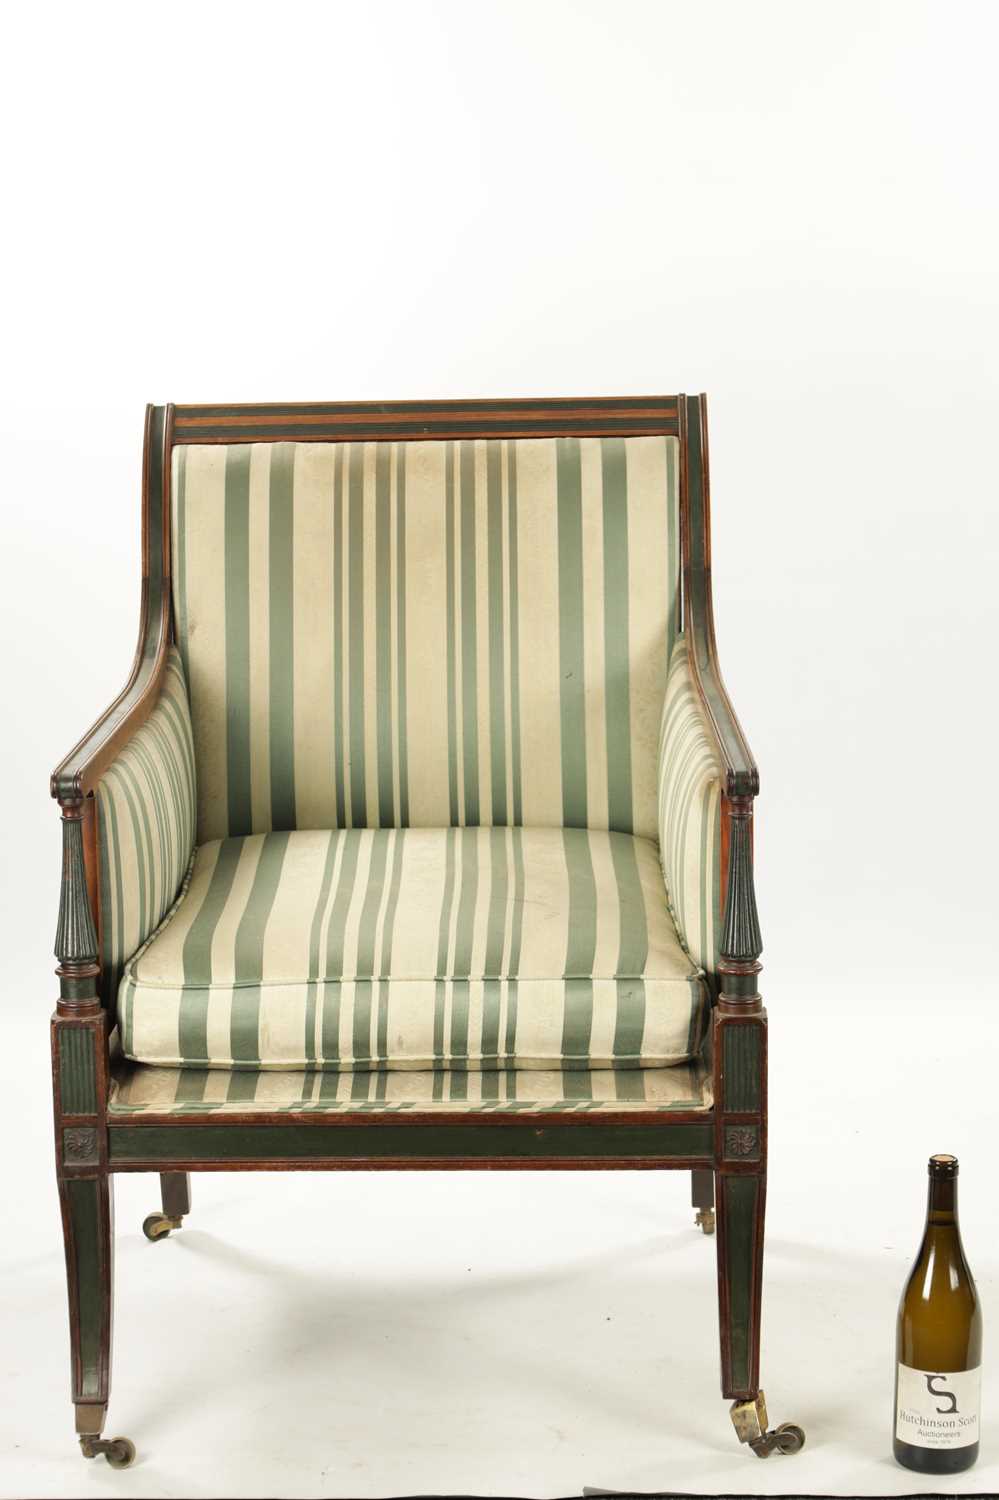 A REGENCY STYLE 19TH CENTURY MAHOGANY LIBRARY CHAIR - Image 4 of 8